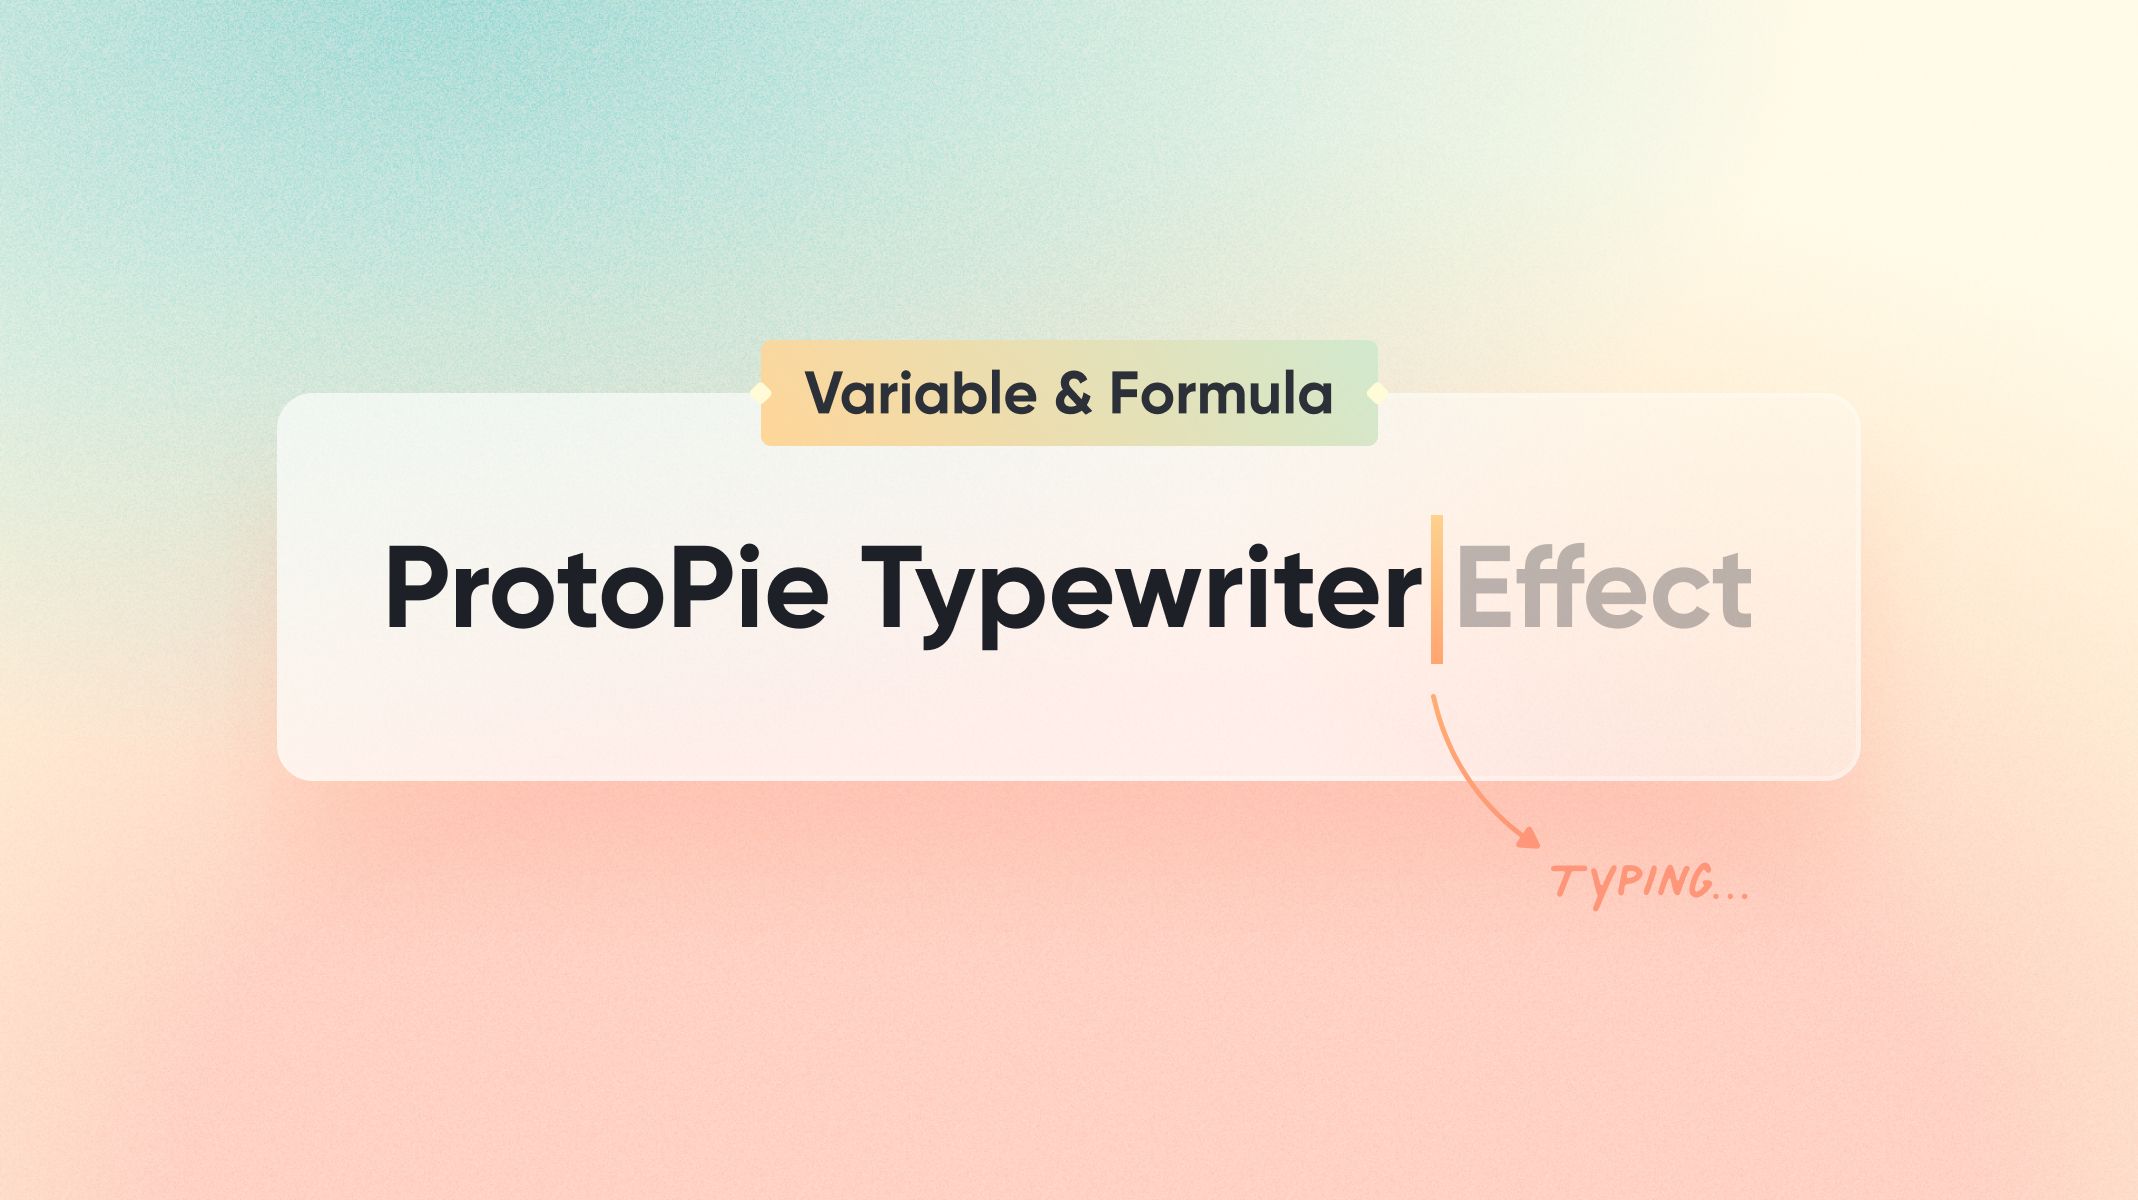 protoPie typewriter effect using variables and formula